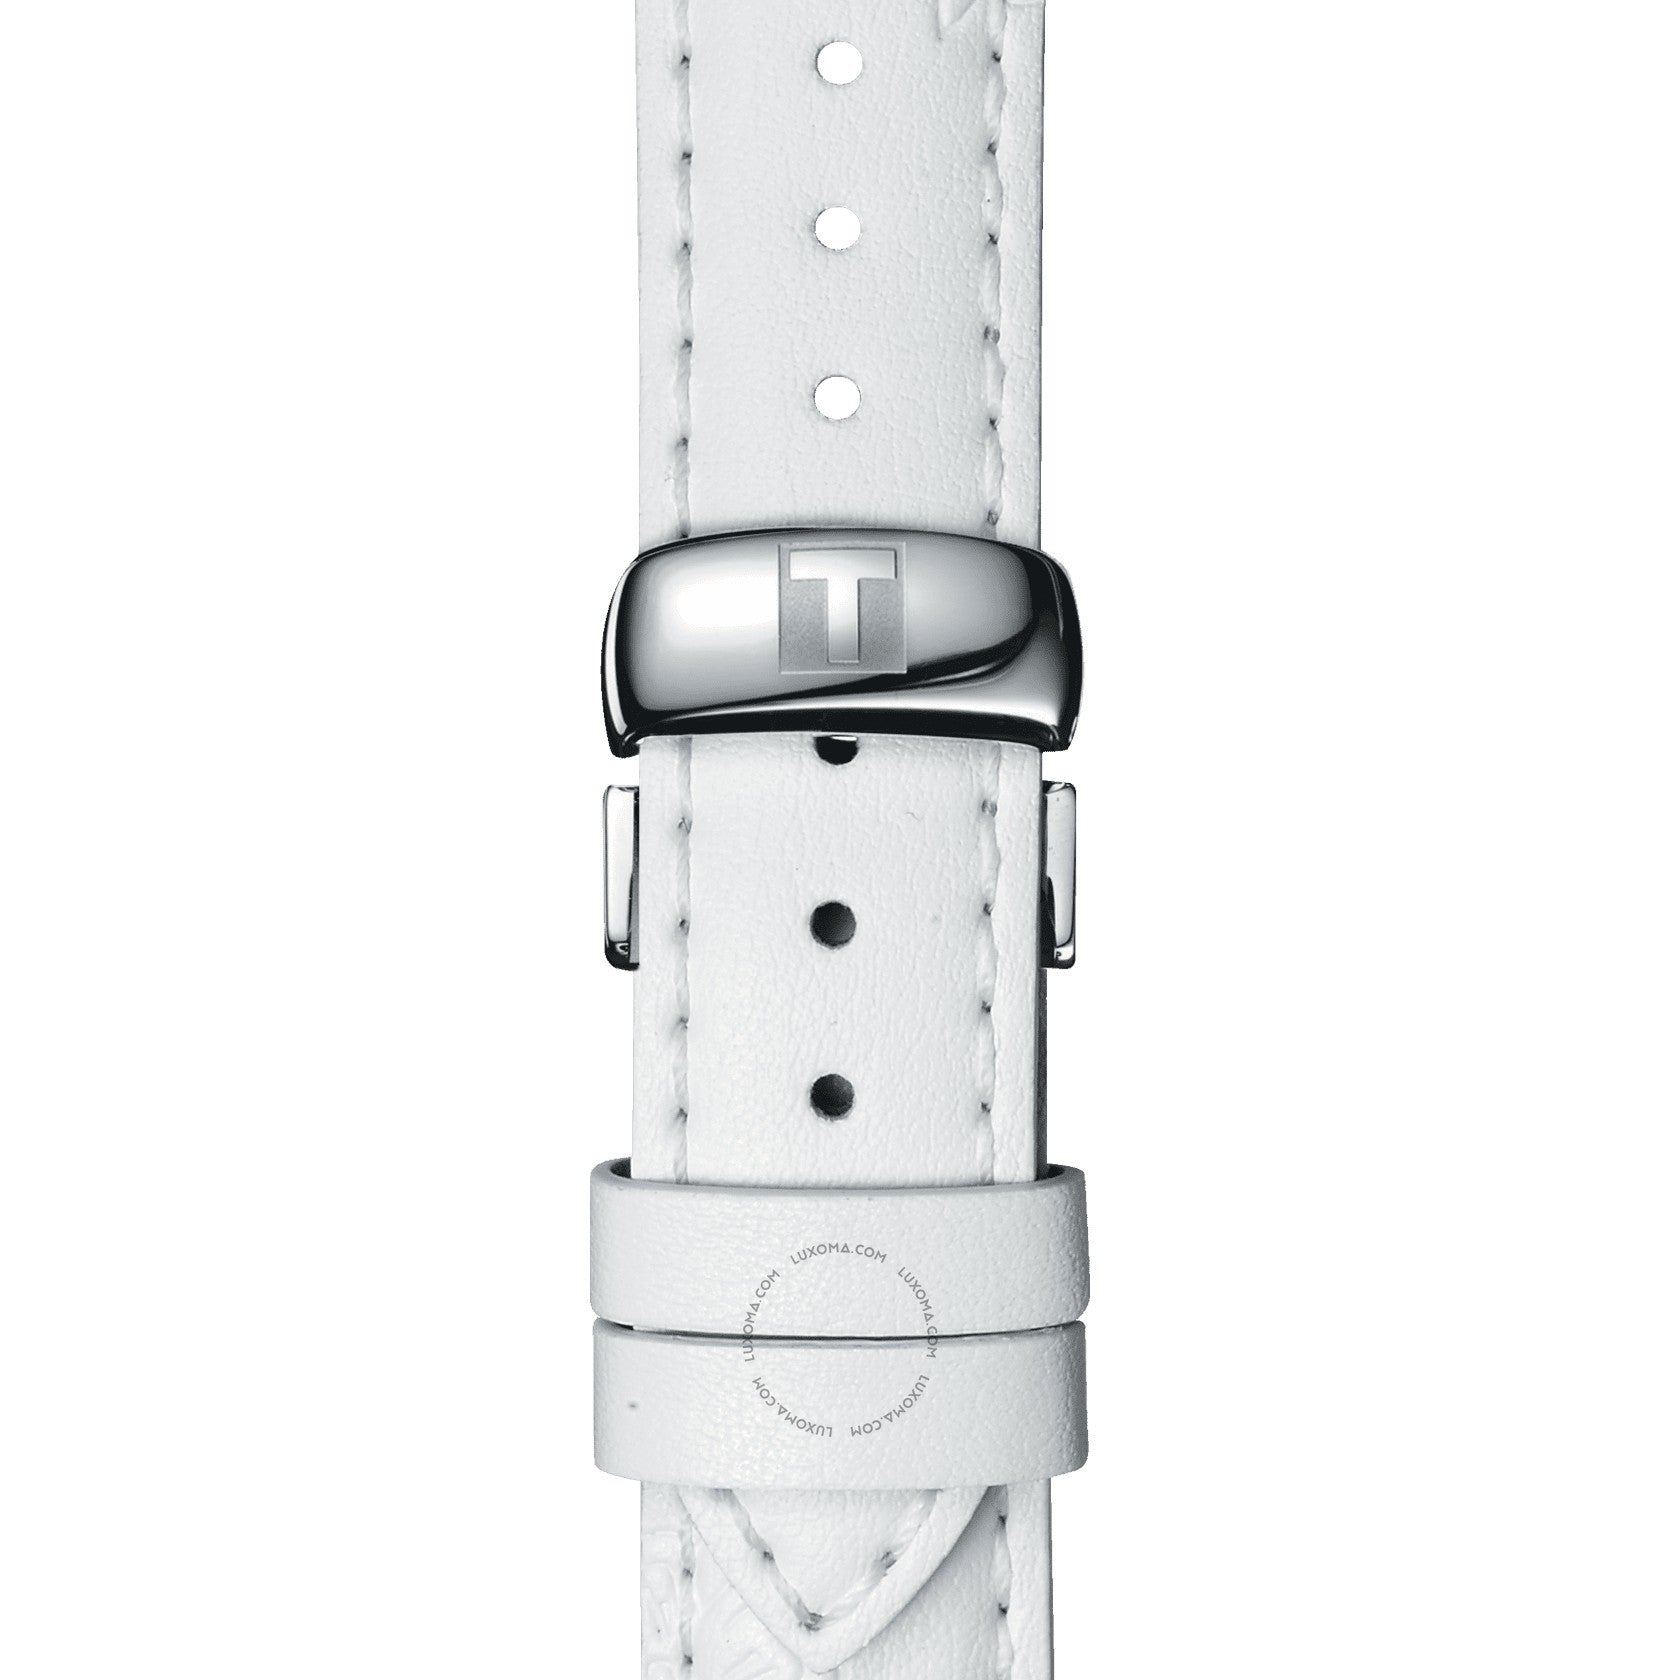 Tissot Tissot Lady Heart Flower Automatic White Mother of Pearl Dial Ladies Watch T050.207.17.117.05